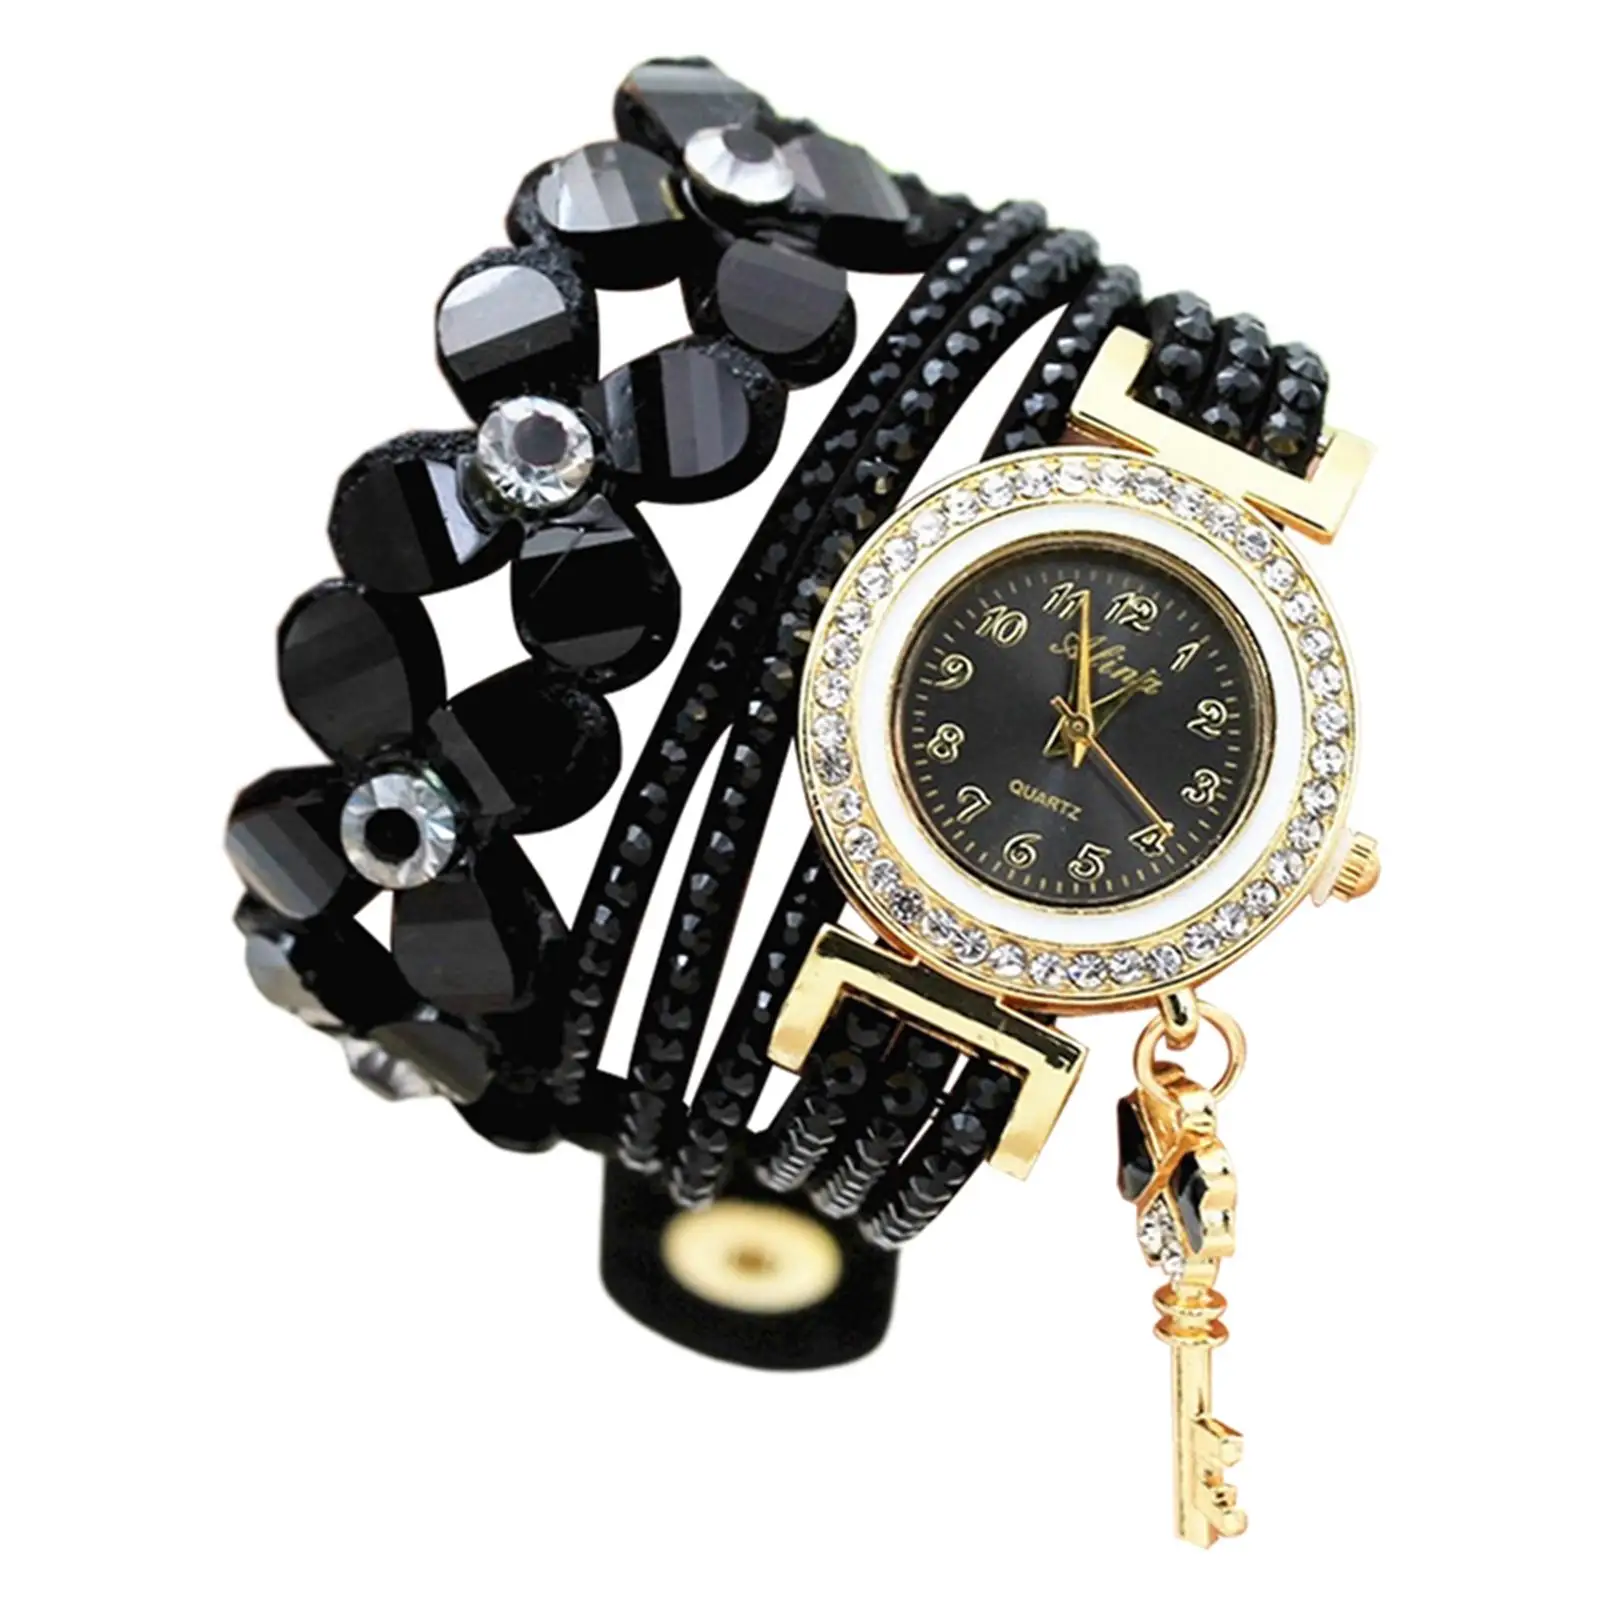 Bracelet Watch Time Display Fashion Casual Women Versatile Decorative Women Watch for Travel Shopping Street Birthday Gift Party